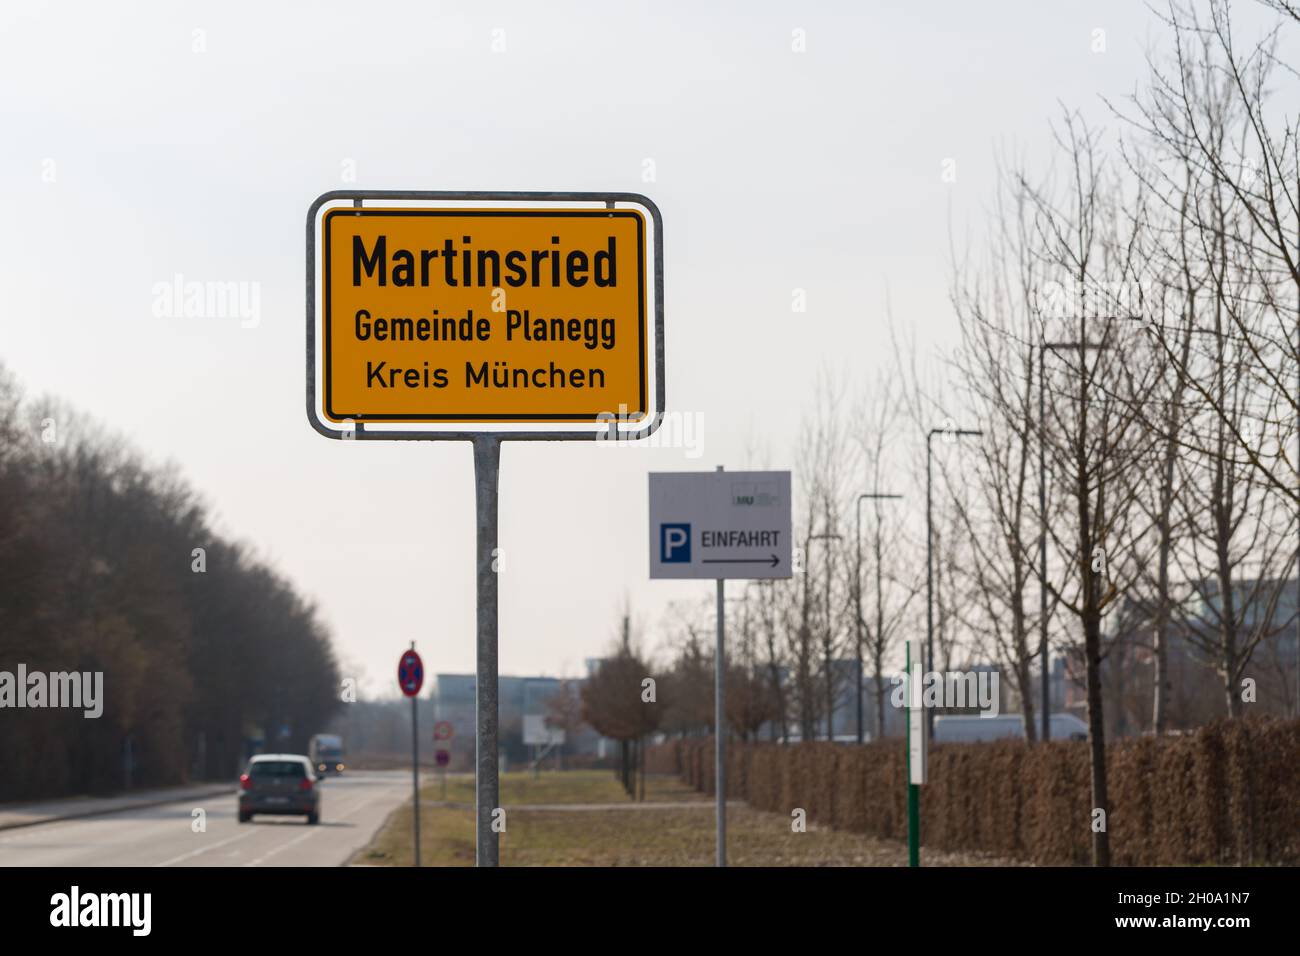 Martinsried, Germany - Mar 9, 2021: Town sign Martinsried. A town close to Munich, home of numerous Biotech companies. Stock Photo